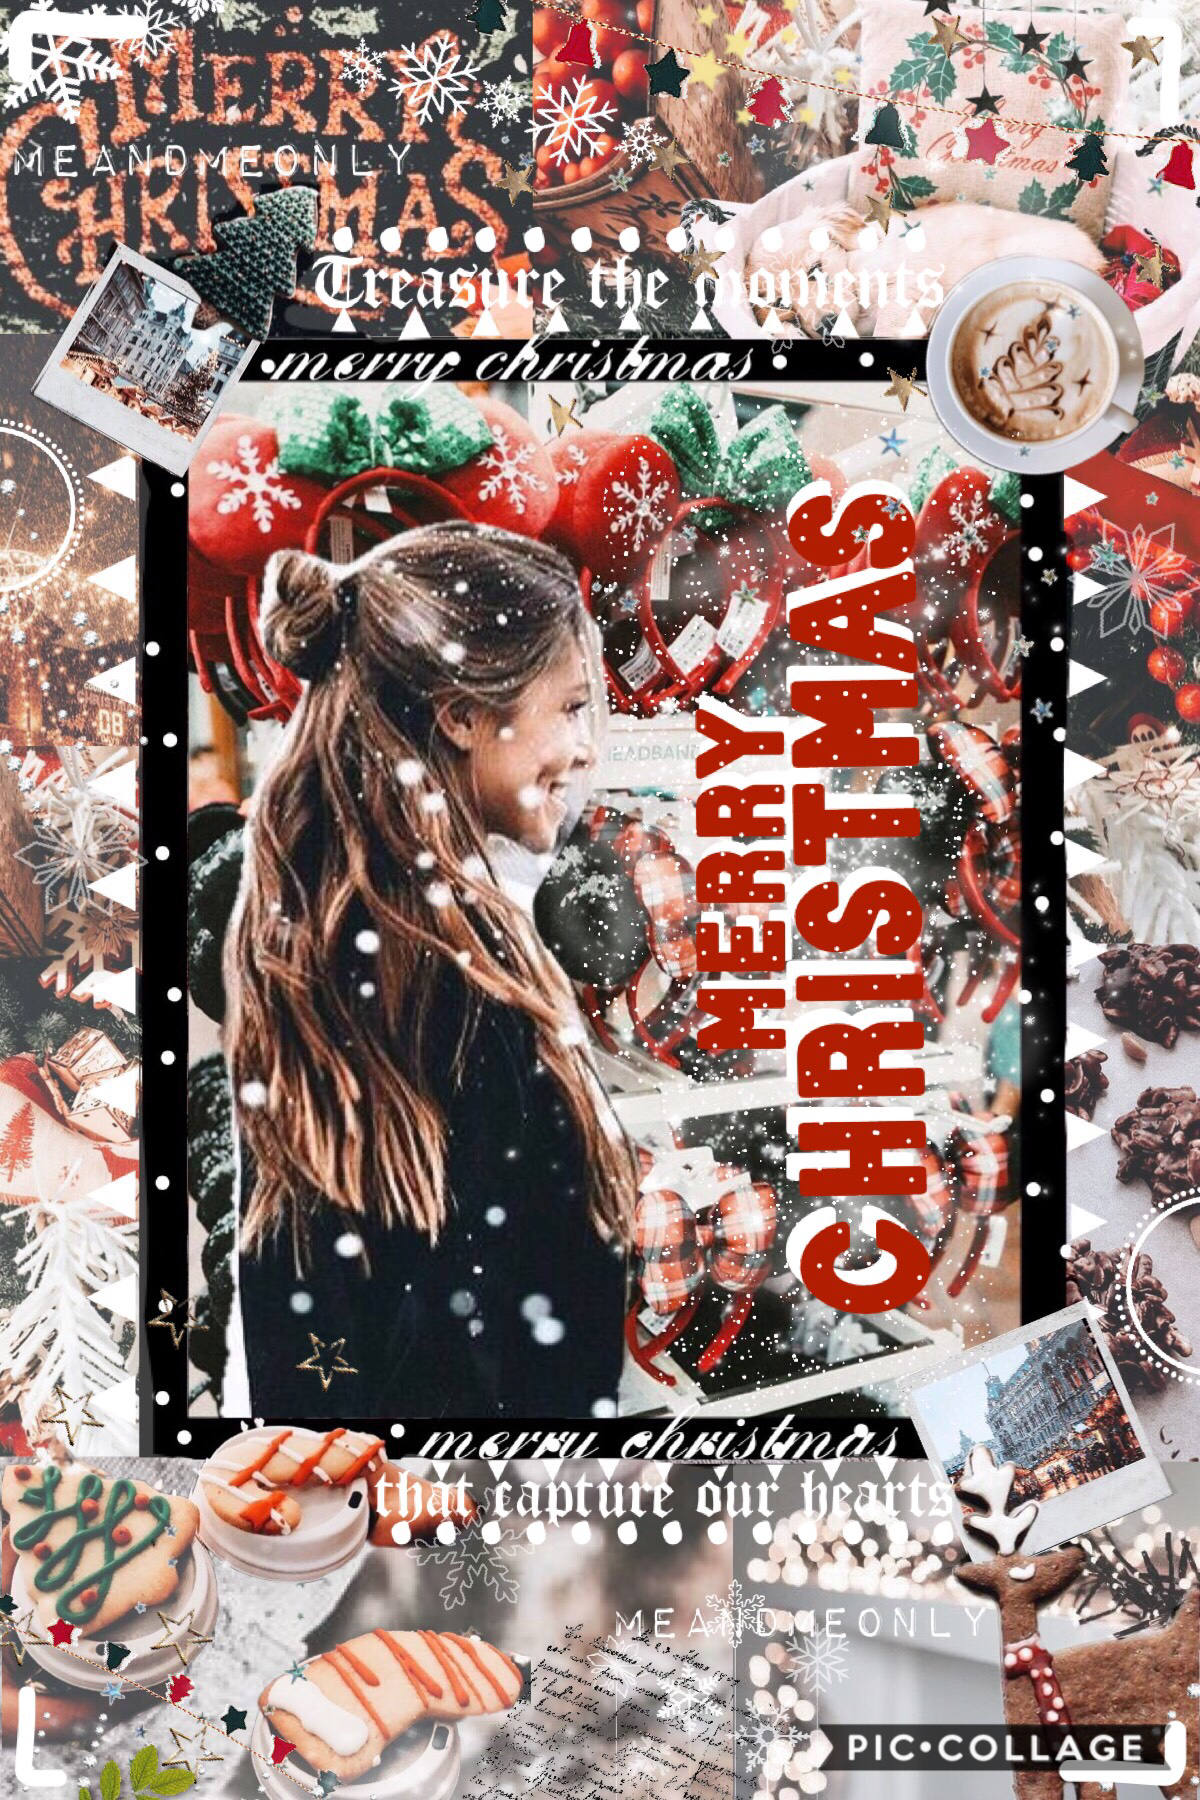 merry christmas everyone❤️🎄 i hope you all get what you wished for and have a wonderful day filled with christmas joy and miracles🥰 thanks again for the 2 features!!comment down below what you got! check remixes🦋